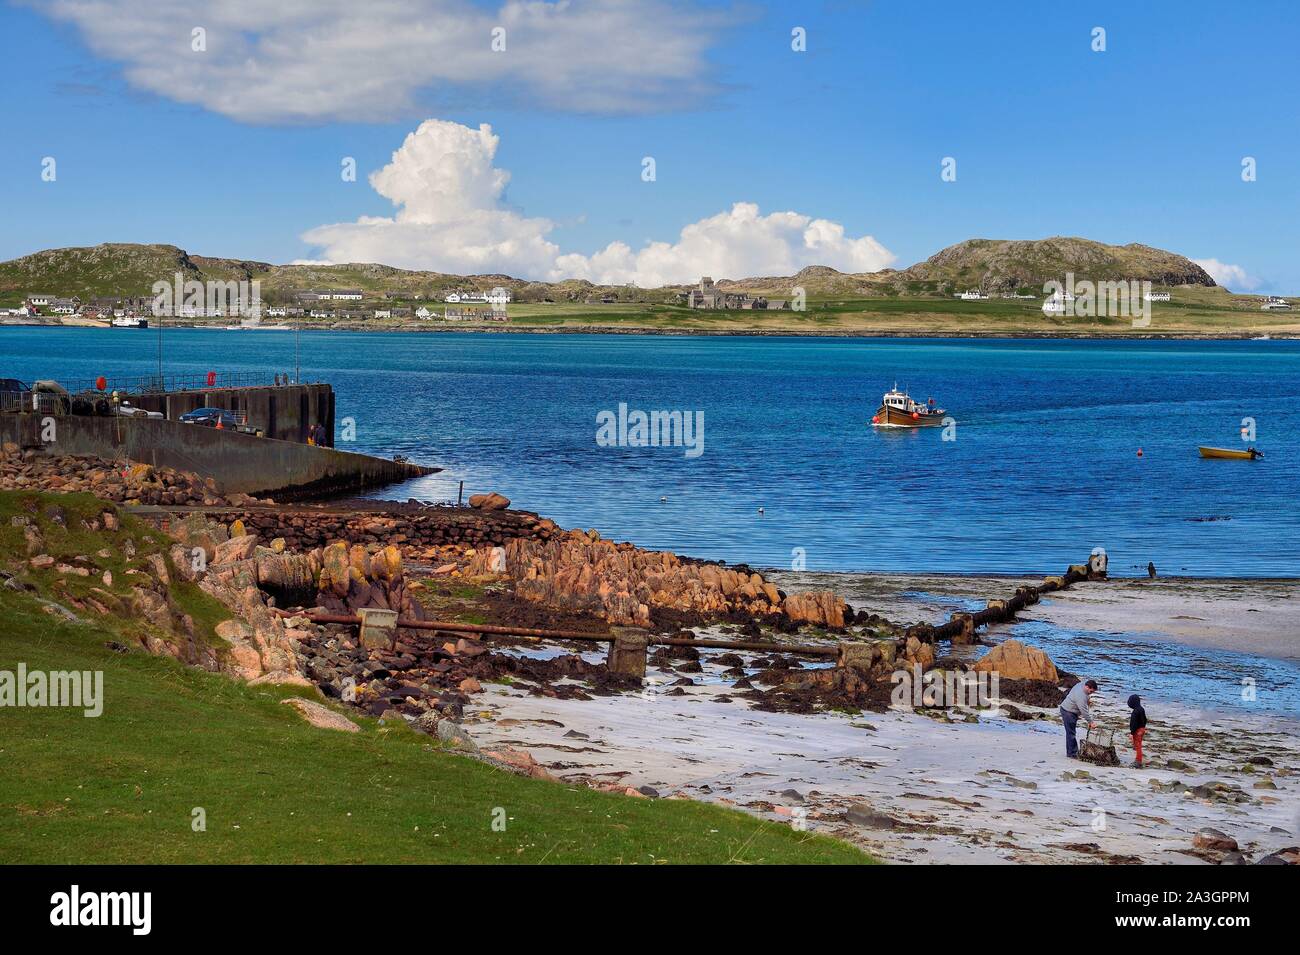 United Kingdom, Scotland, Highland, Inner Hebrides, the Ross of Mull in the extreme southwest of the Isle of Mull, Fionnphort and opposite the Iona Island abbey by the sea Stock Photo